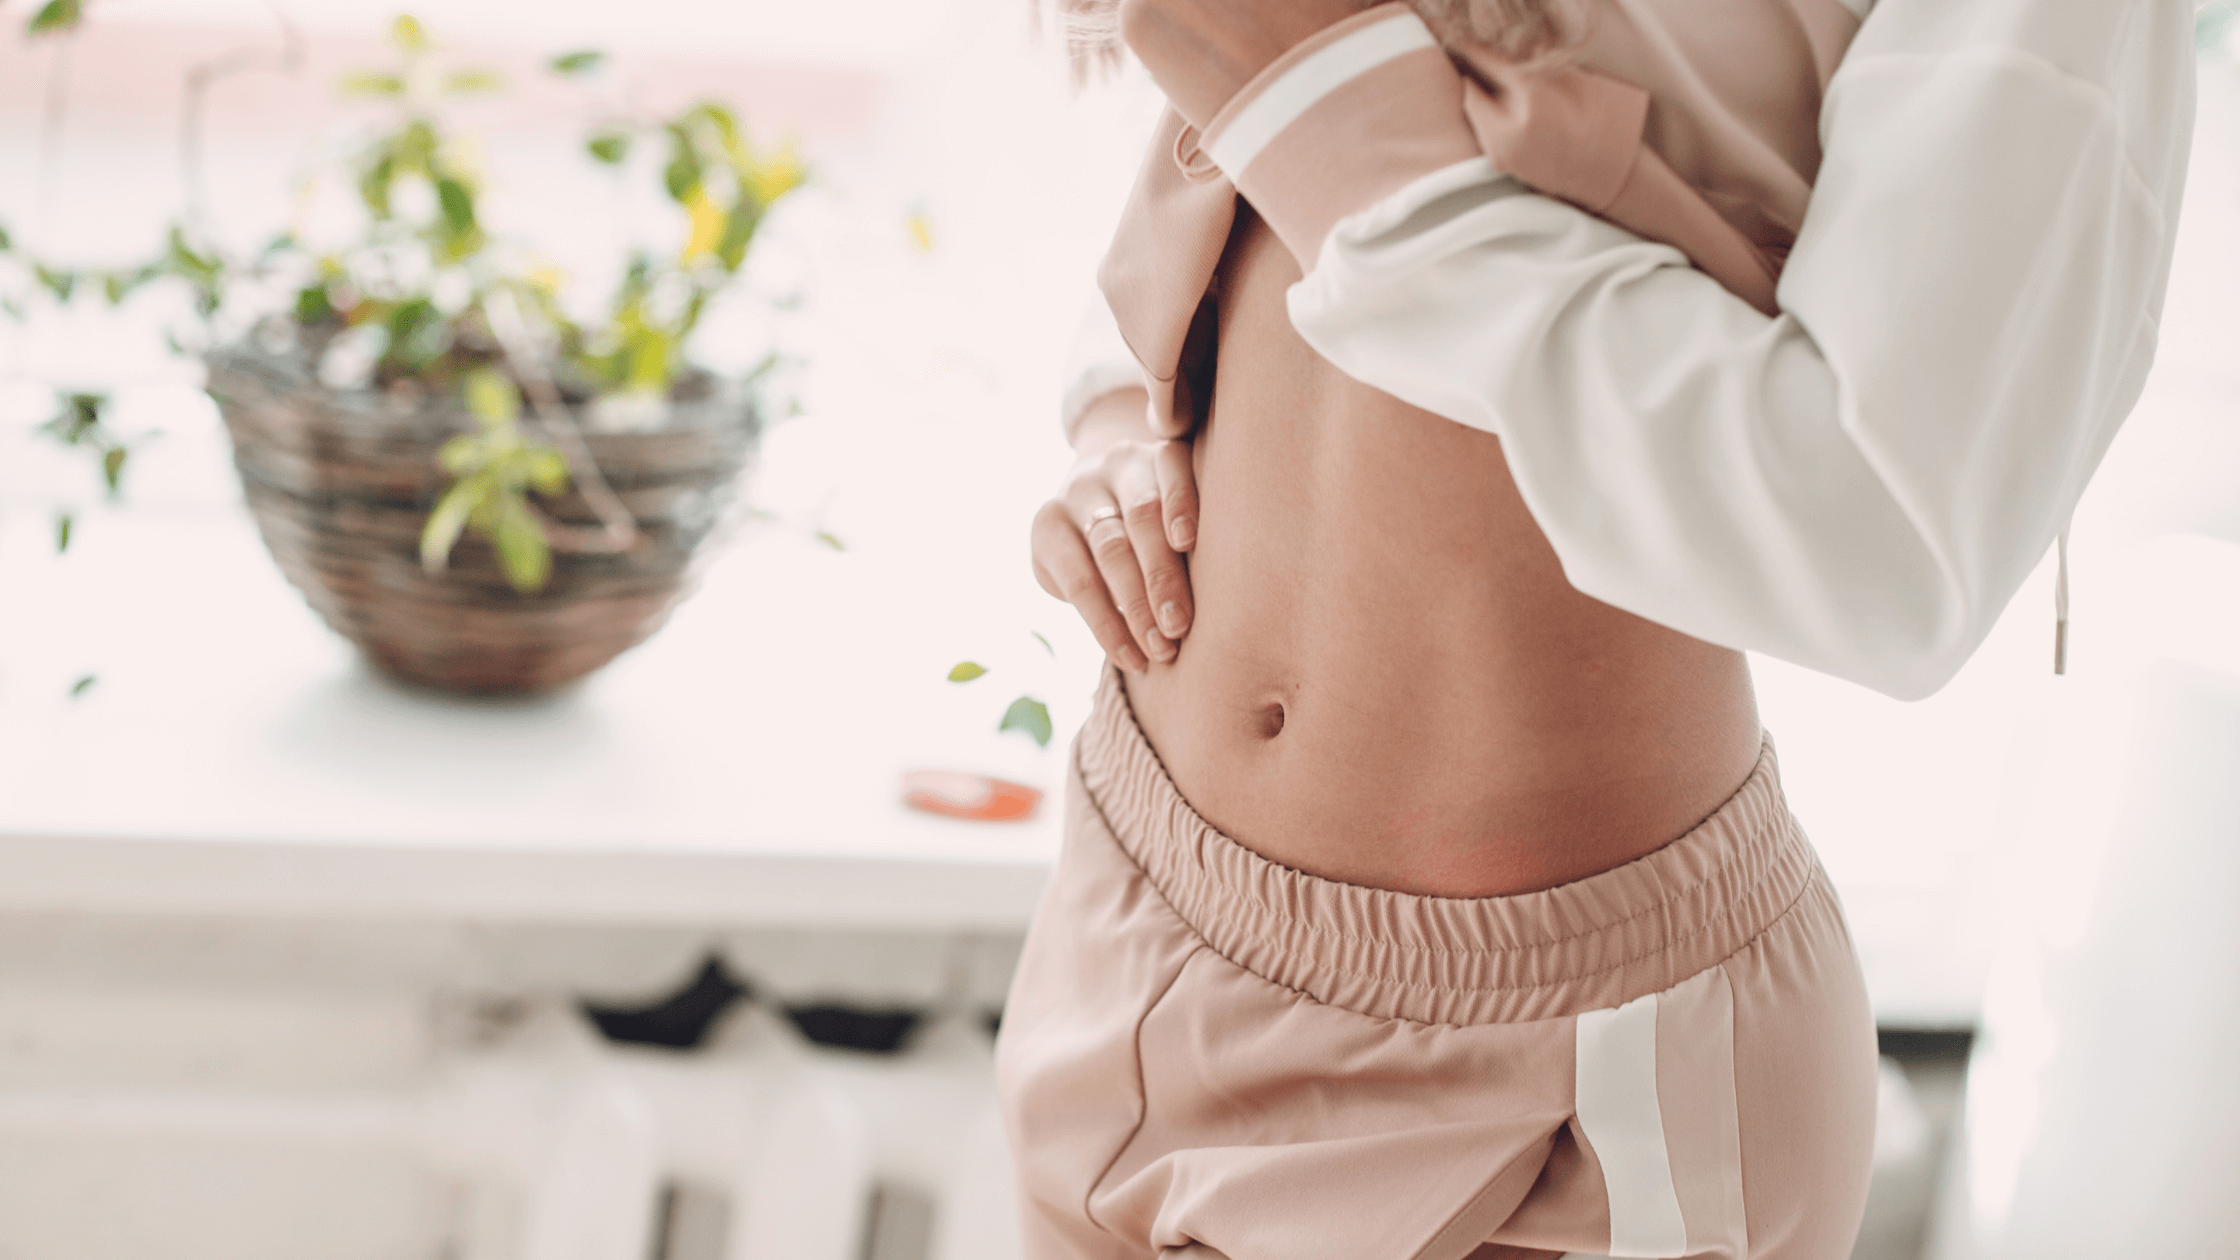 How to Reduce Stretch Marks With Non-Surgical Treatments